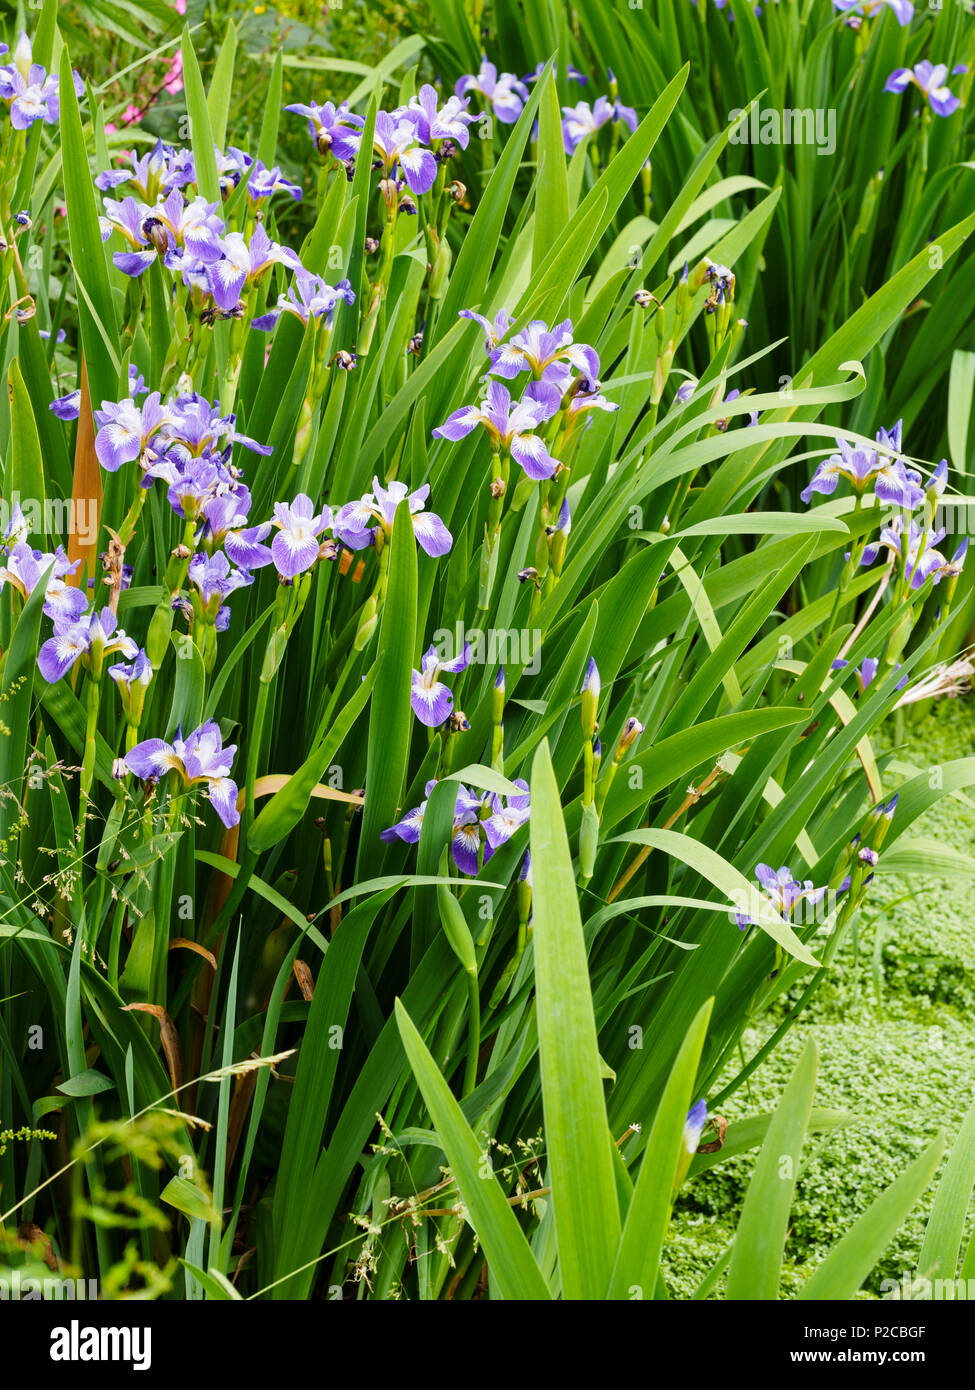 Blue and white early ummer flowers of the marginal aquatic hardy iris ...